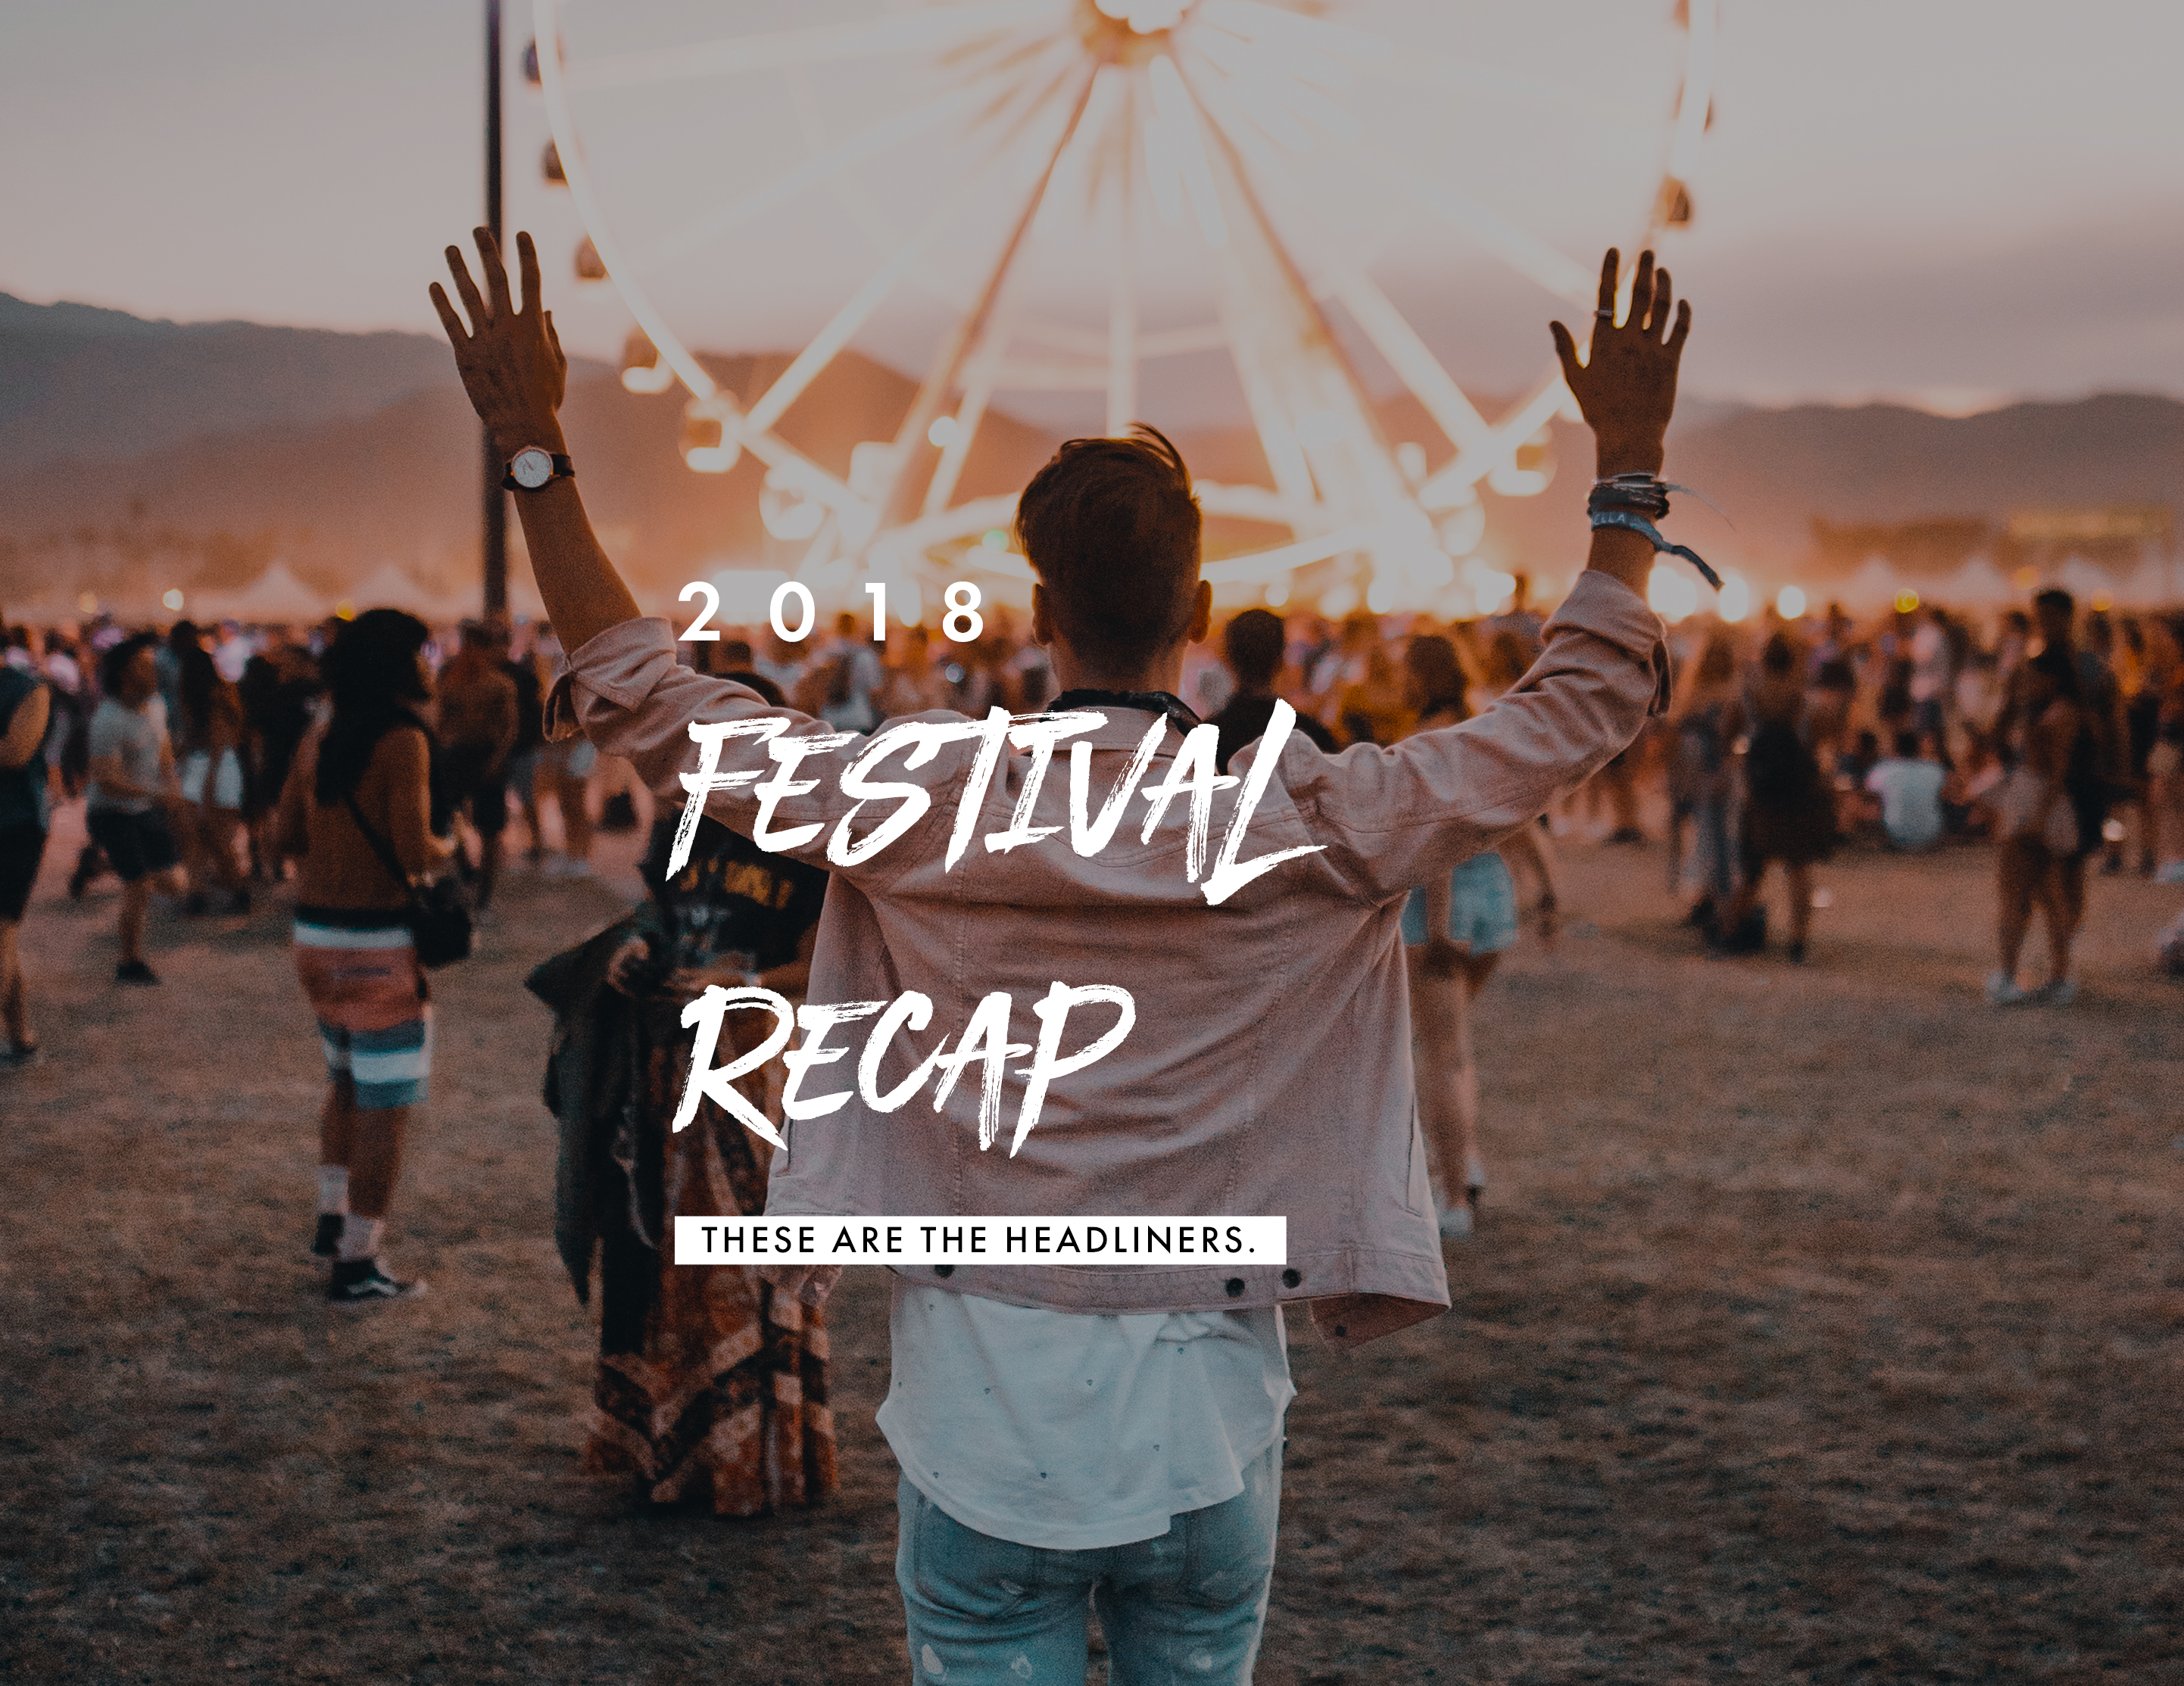 2018 Festival Recap. These are the headliners.